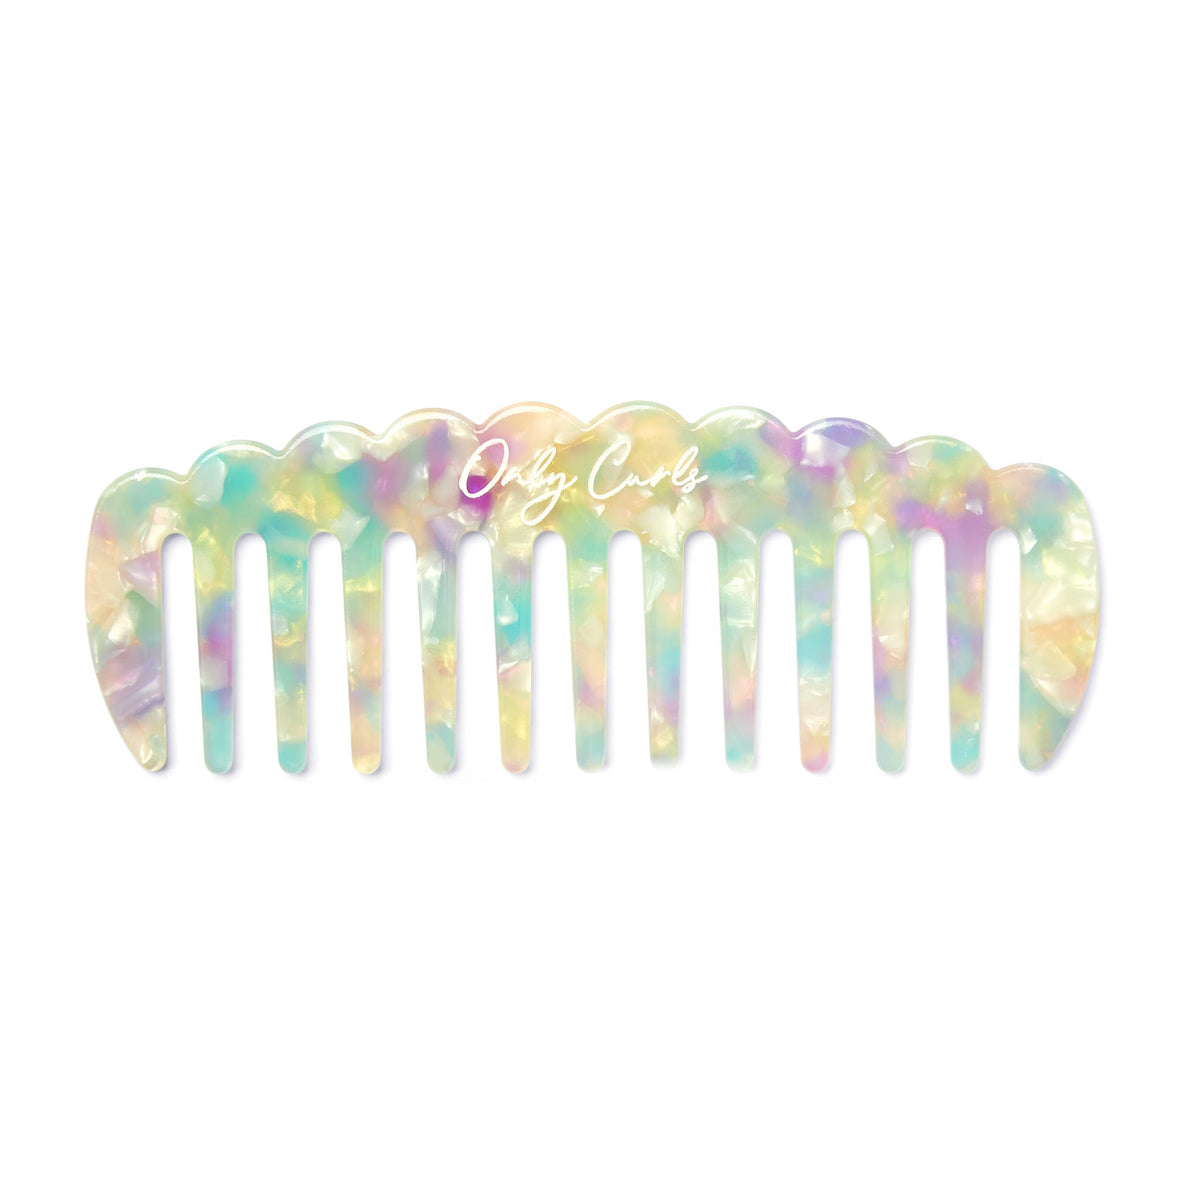 Only Curls Pastel Mermaid Comb - Only Curls